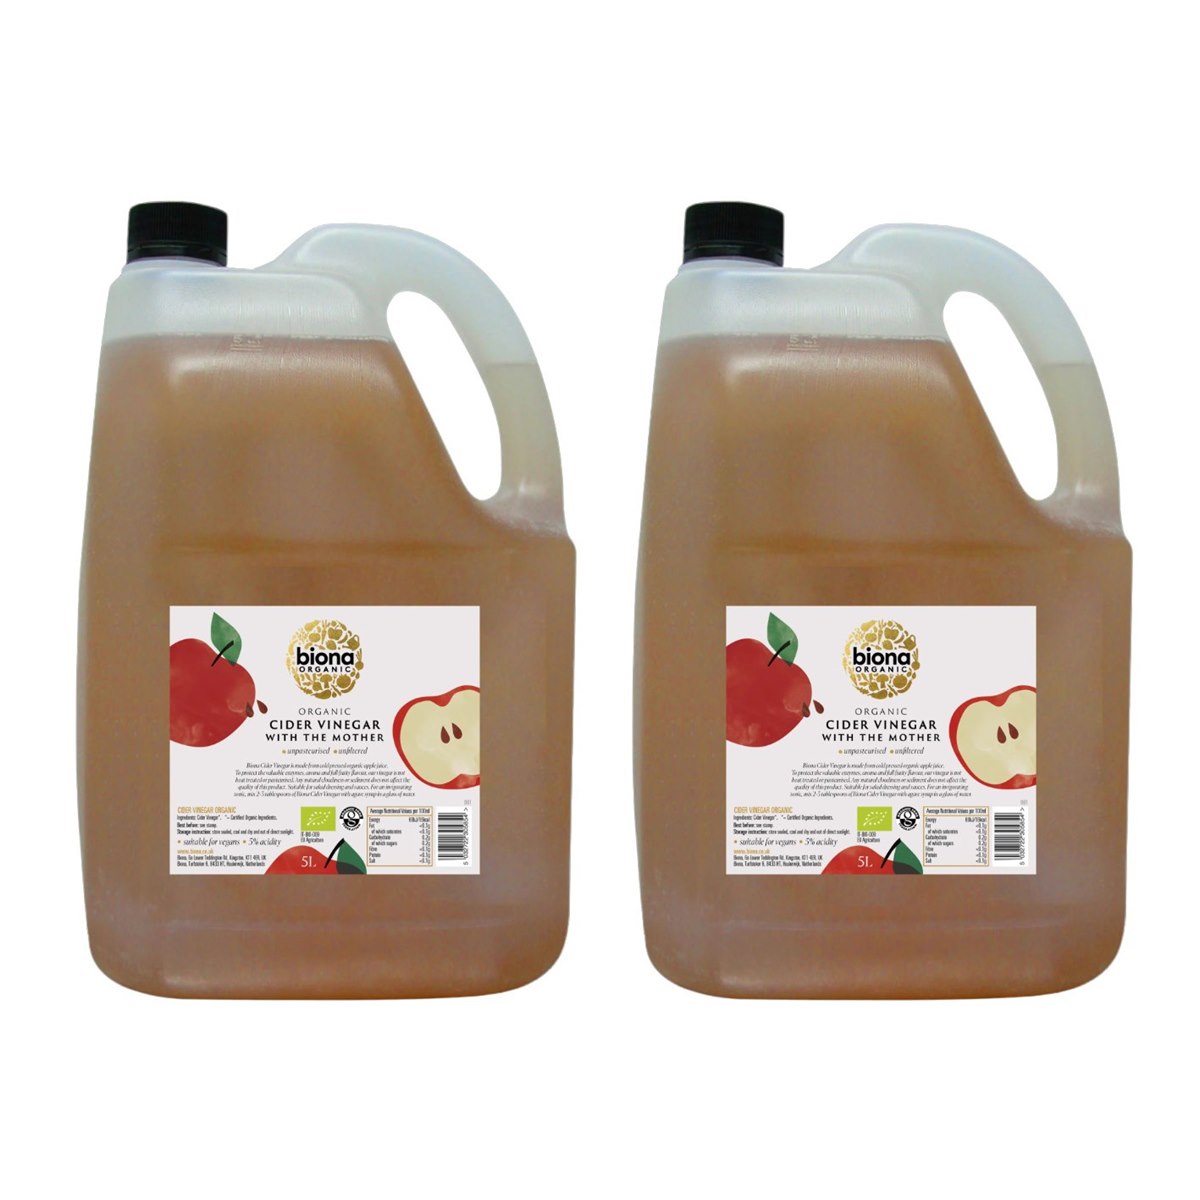 Case of 2 x Biona Raw Organic Apple Cider Vinegar with Mother 5 Litre